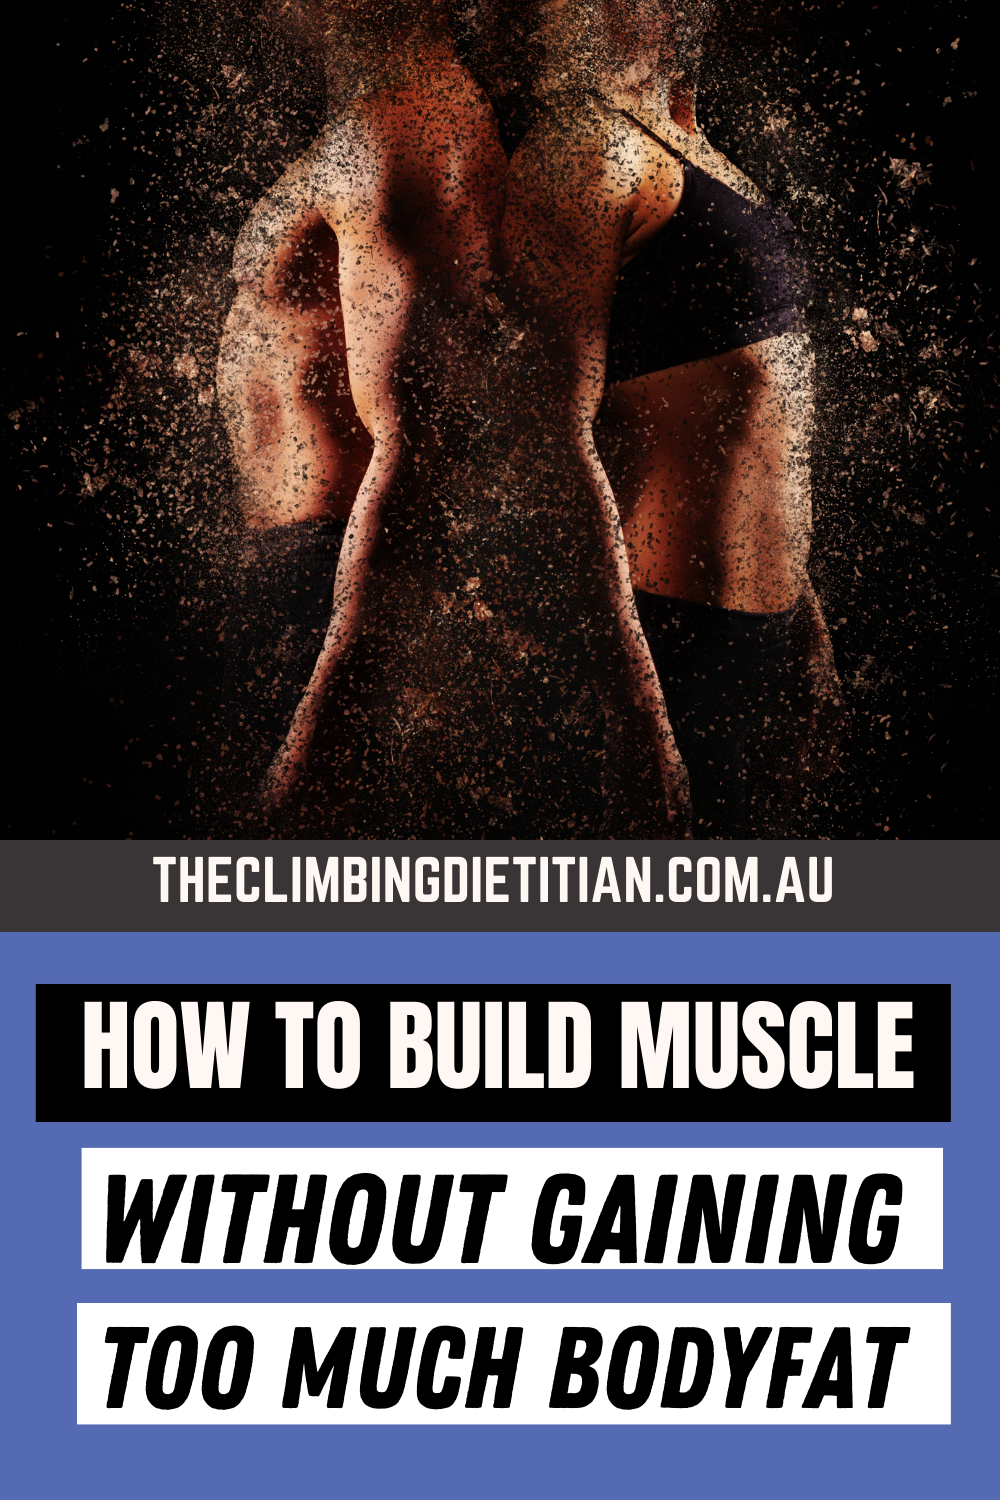 How-to-gain-muscle-mass-without-gaining-bodyfat-muscle-building-nutrition-brisbane-dietitian-nutritionist